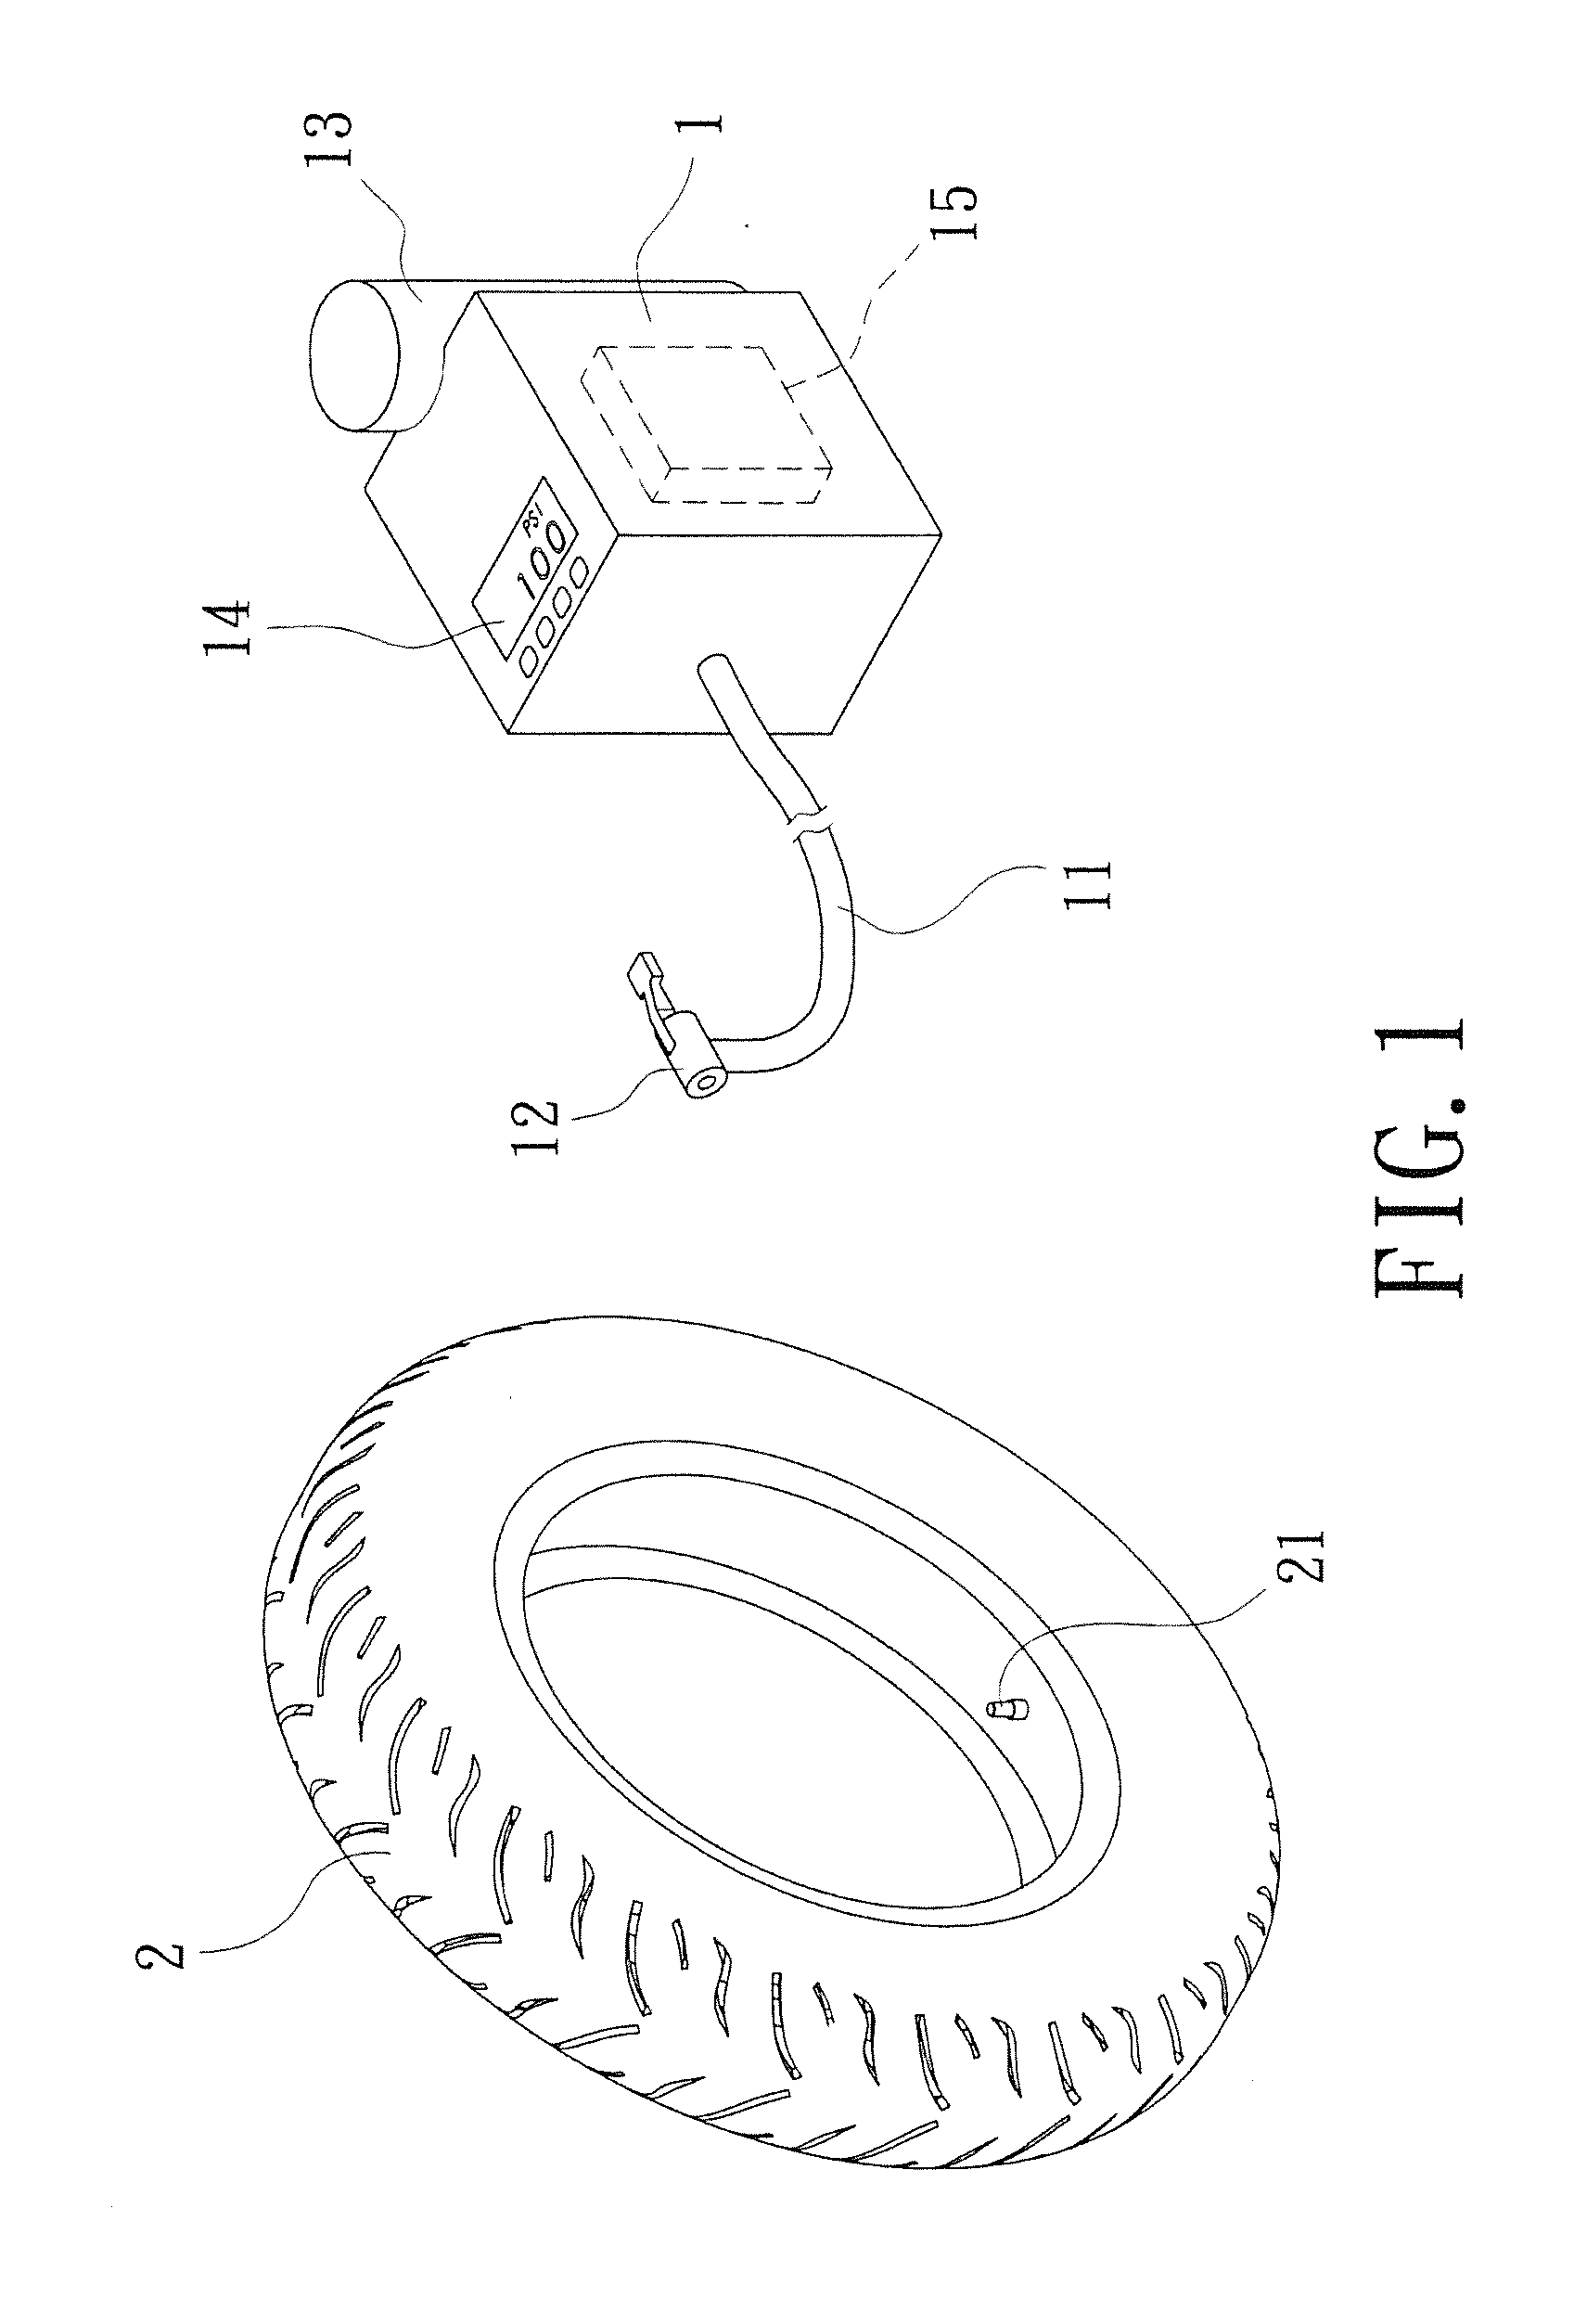 Automatic control method of inflation